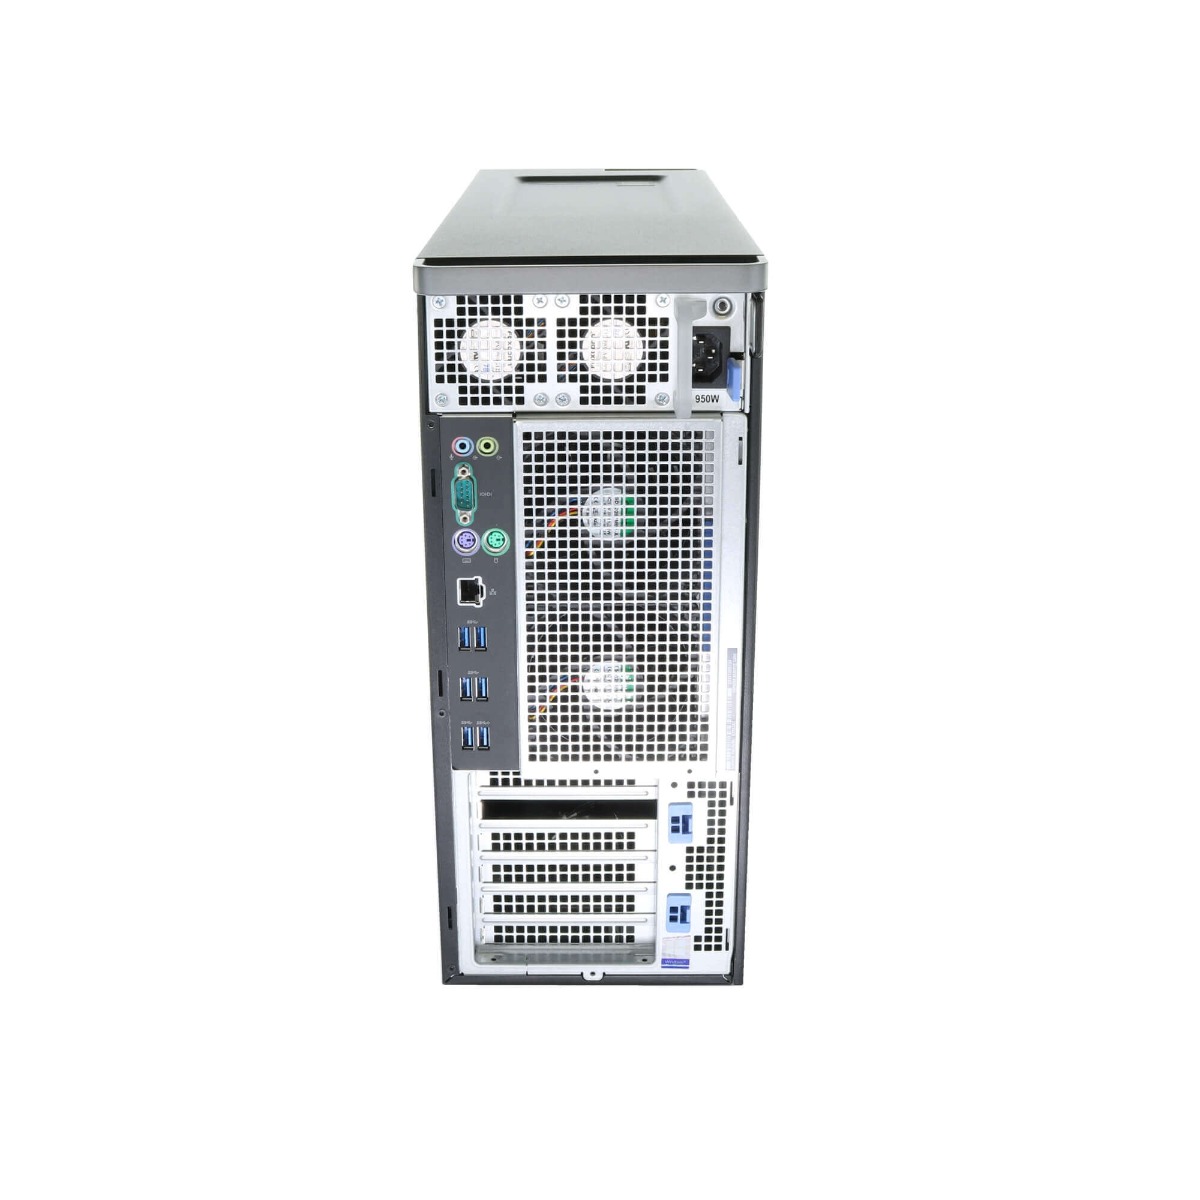 Dell Precision T7820 Tower Workstation - Configure Your Own